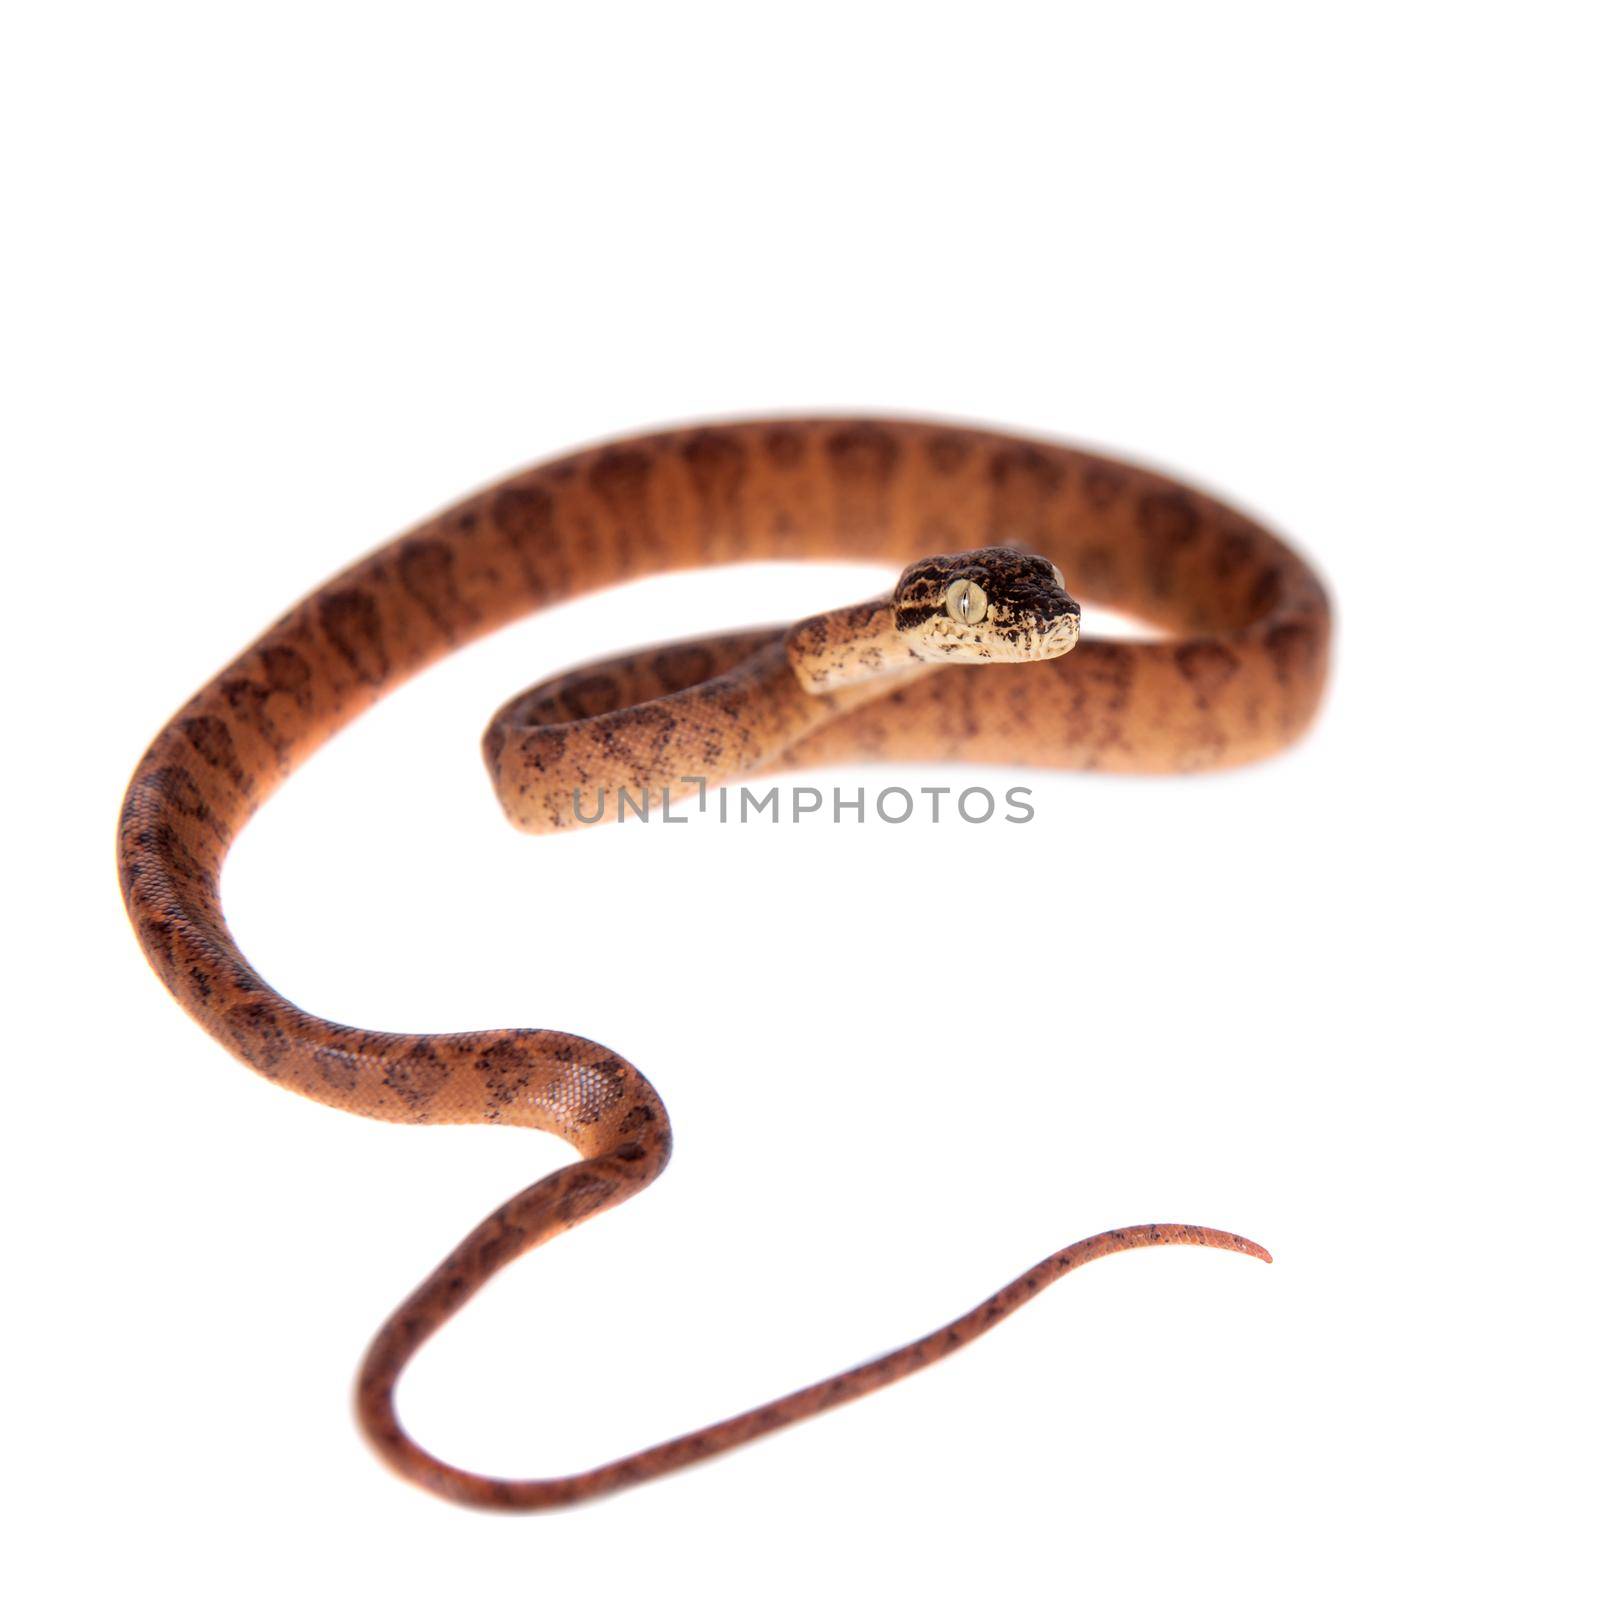 Red Amazon tree boa, 7 days old, isolated on white by RosaJay